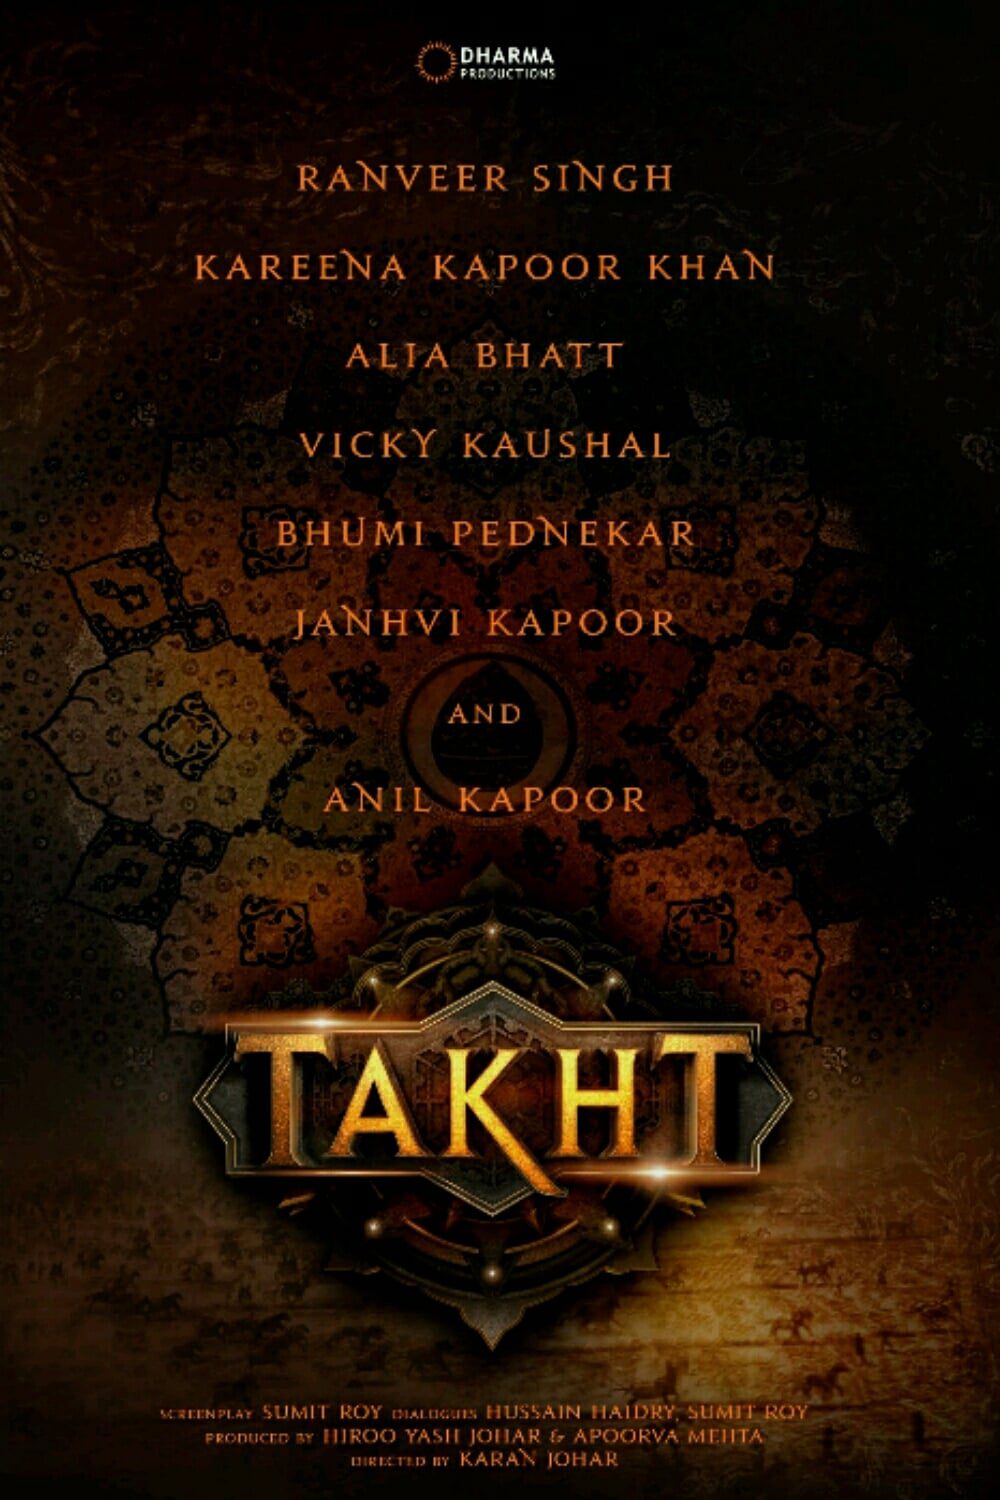 Poster for the movie "Takht"